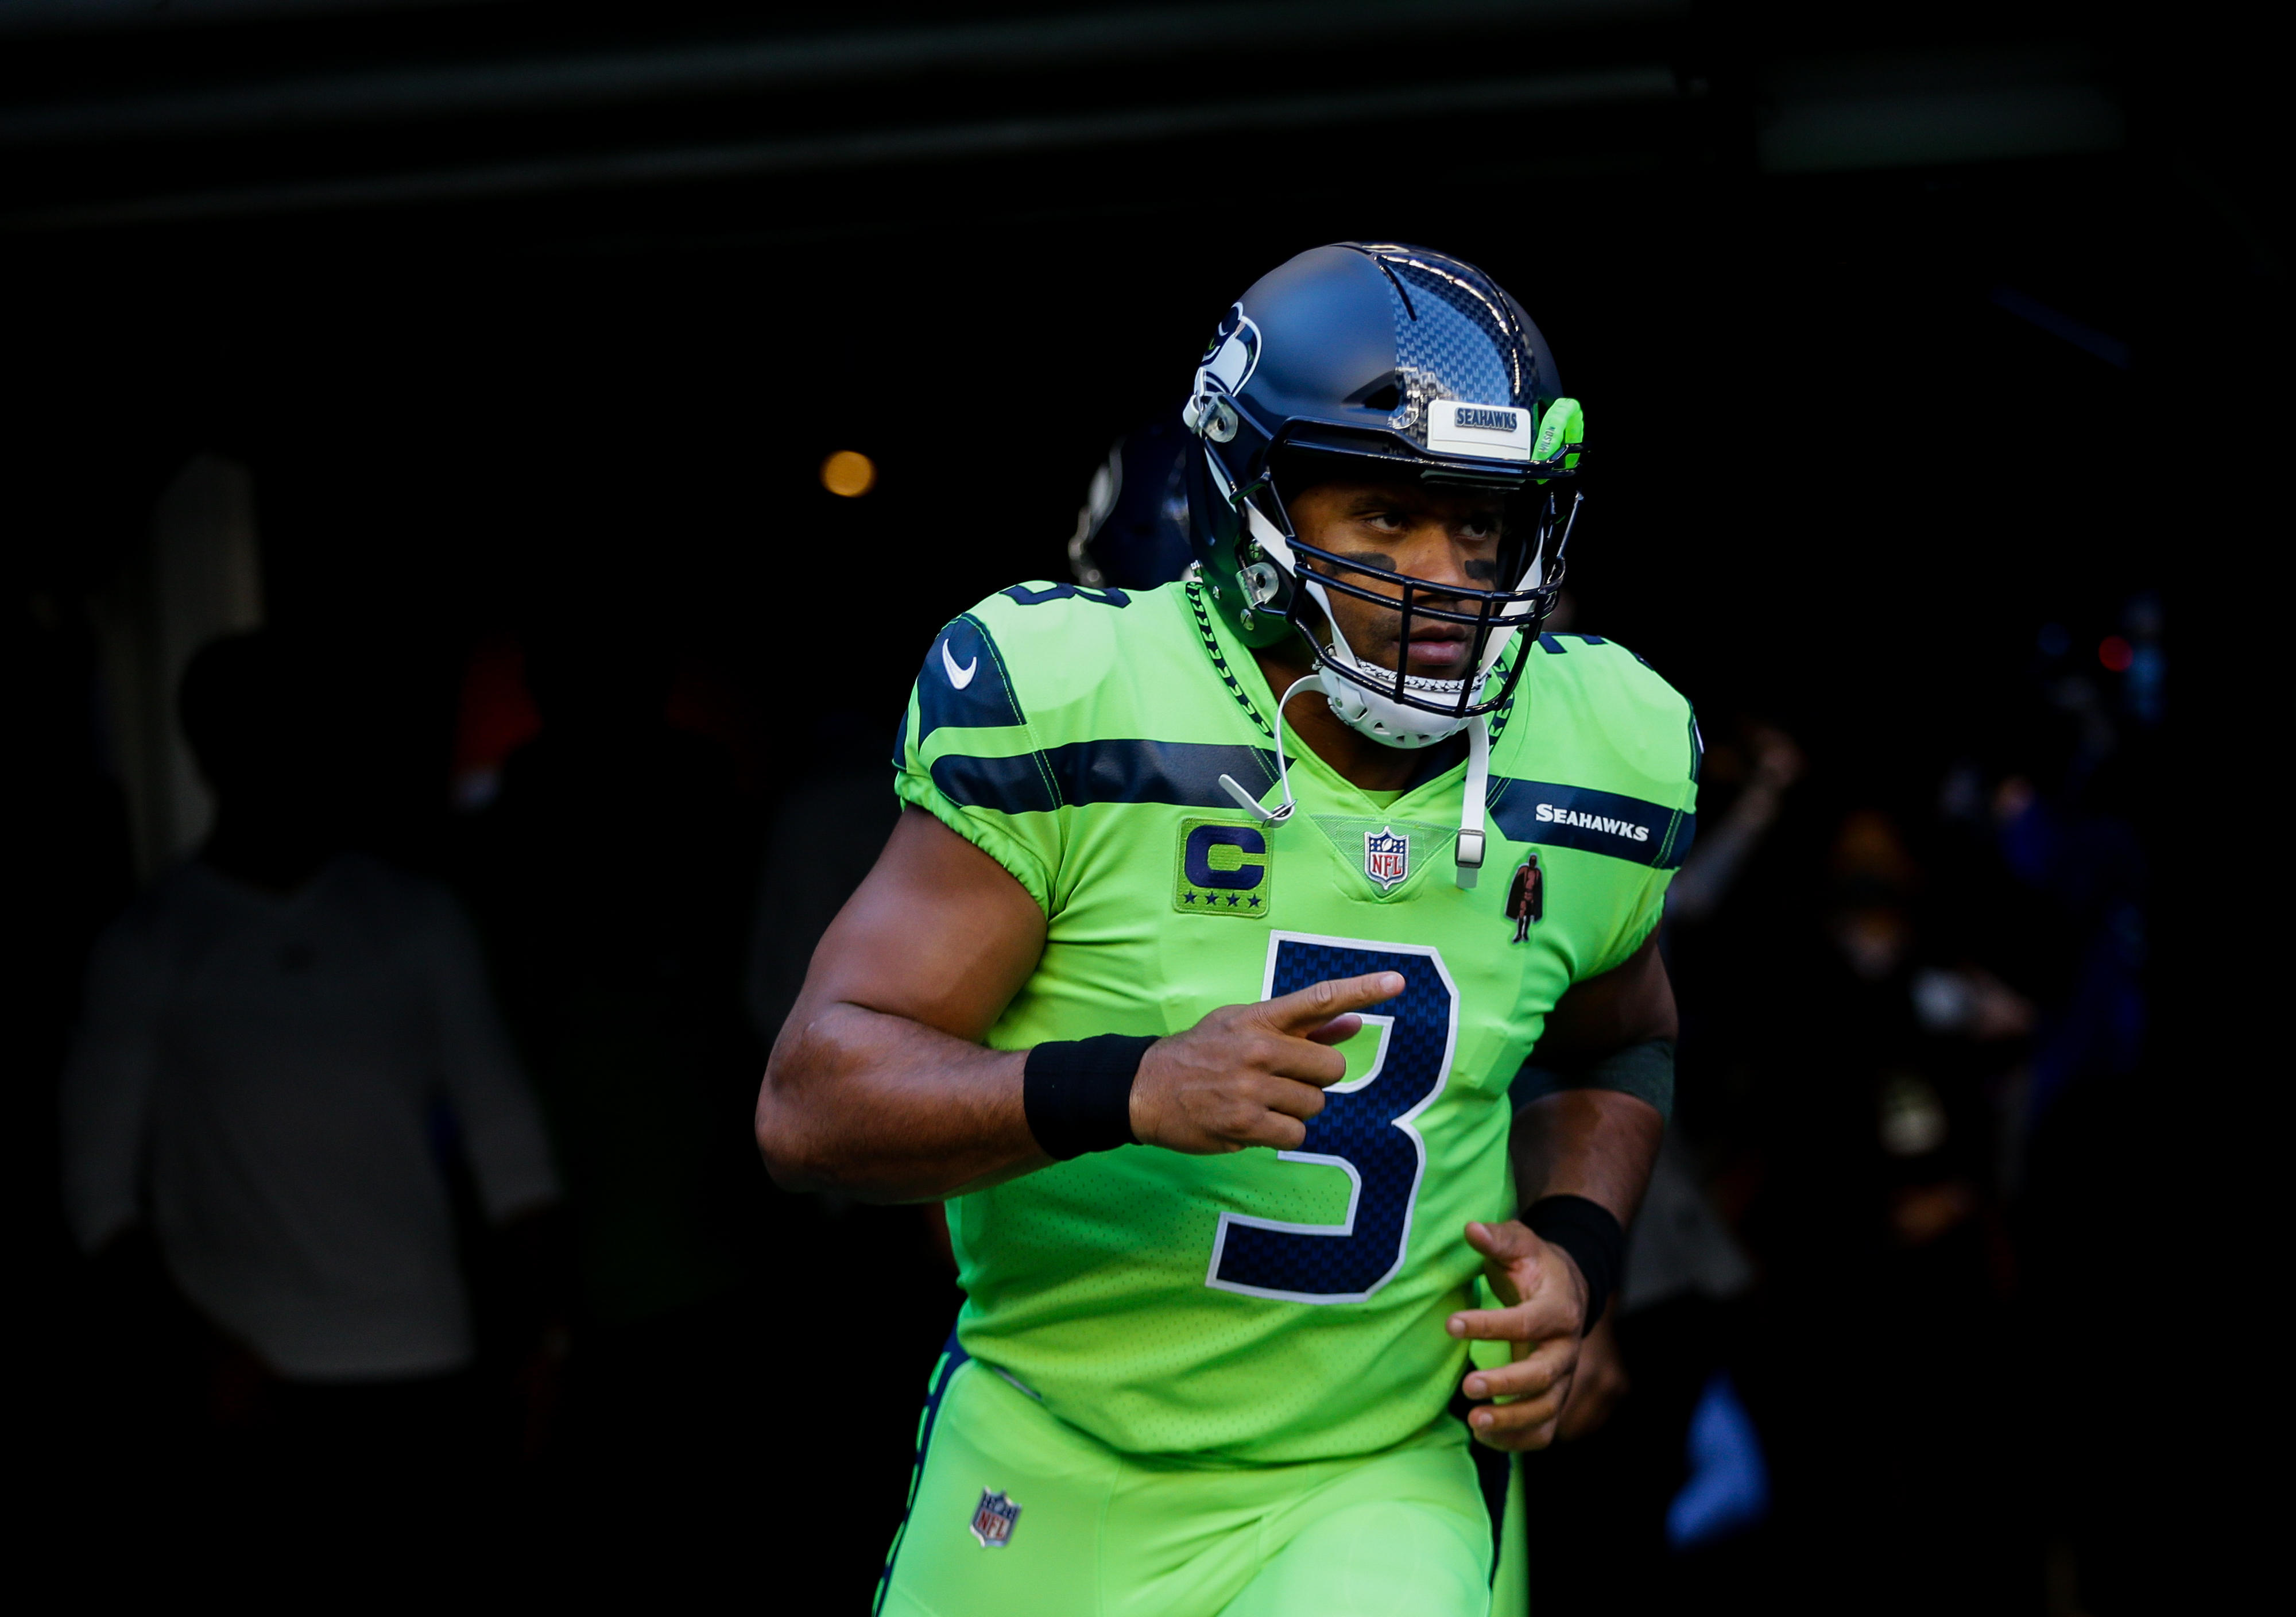 Quarterback Russell Wilson of the Seattle Seahawks runs out for the game against the Los Angeles Rams at Lumen Field on October 7, 2021 in Seattle, Washington. The Russell Wilson contract makes it much easier to trade the QB this offseason.